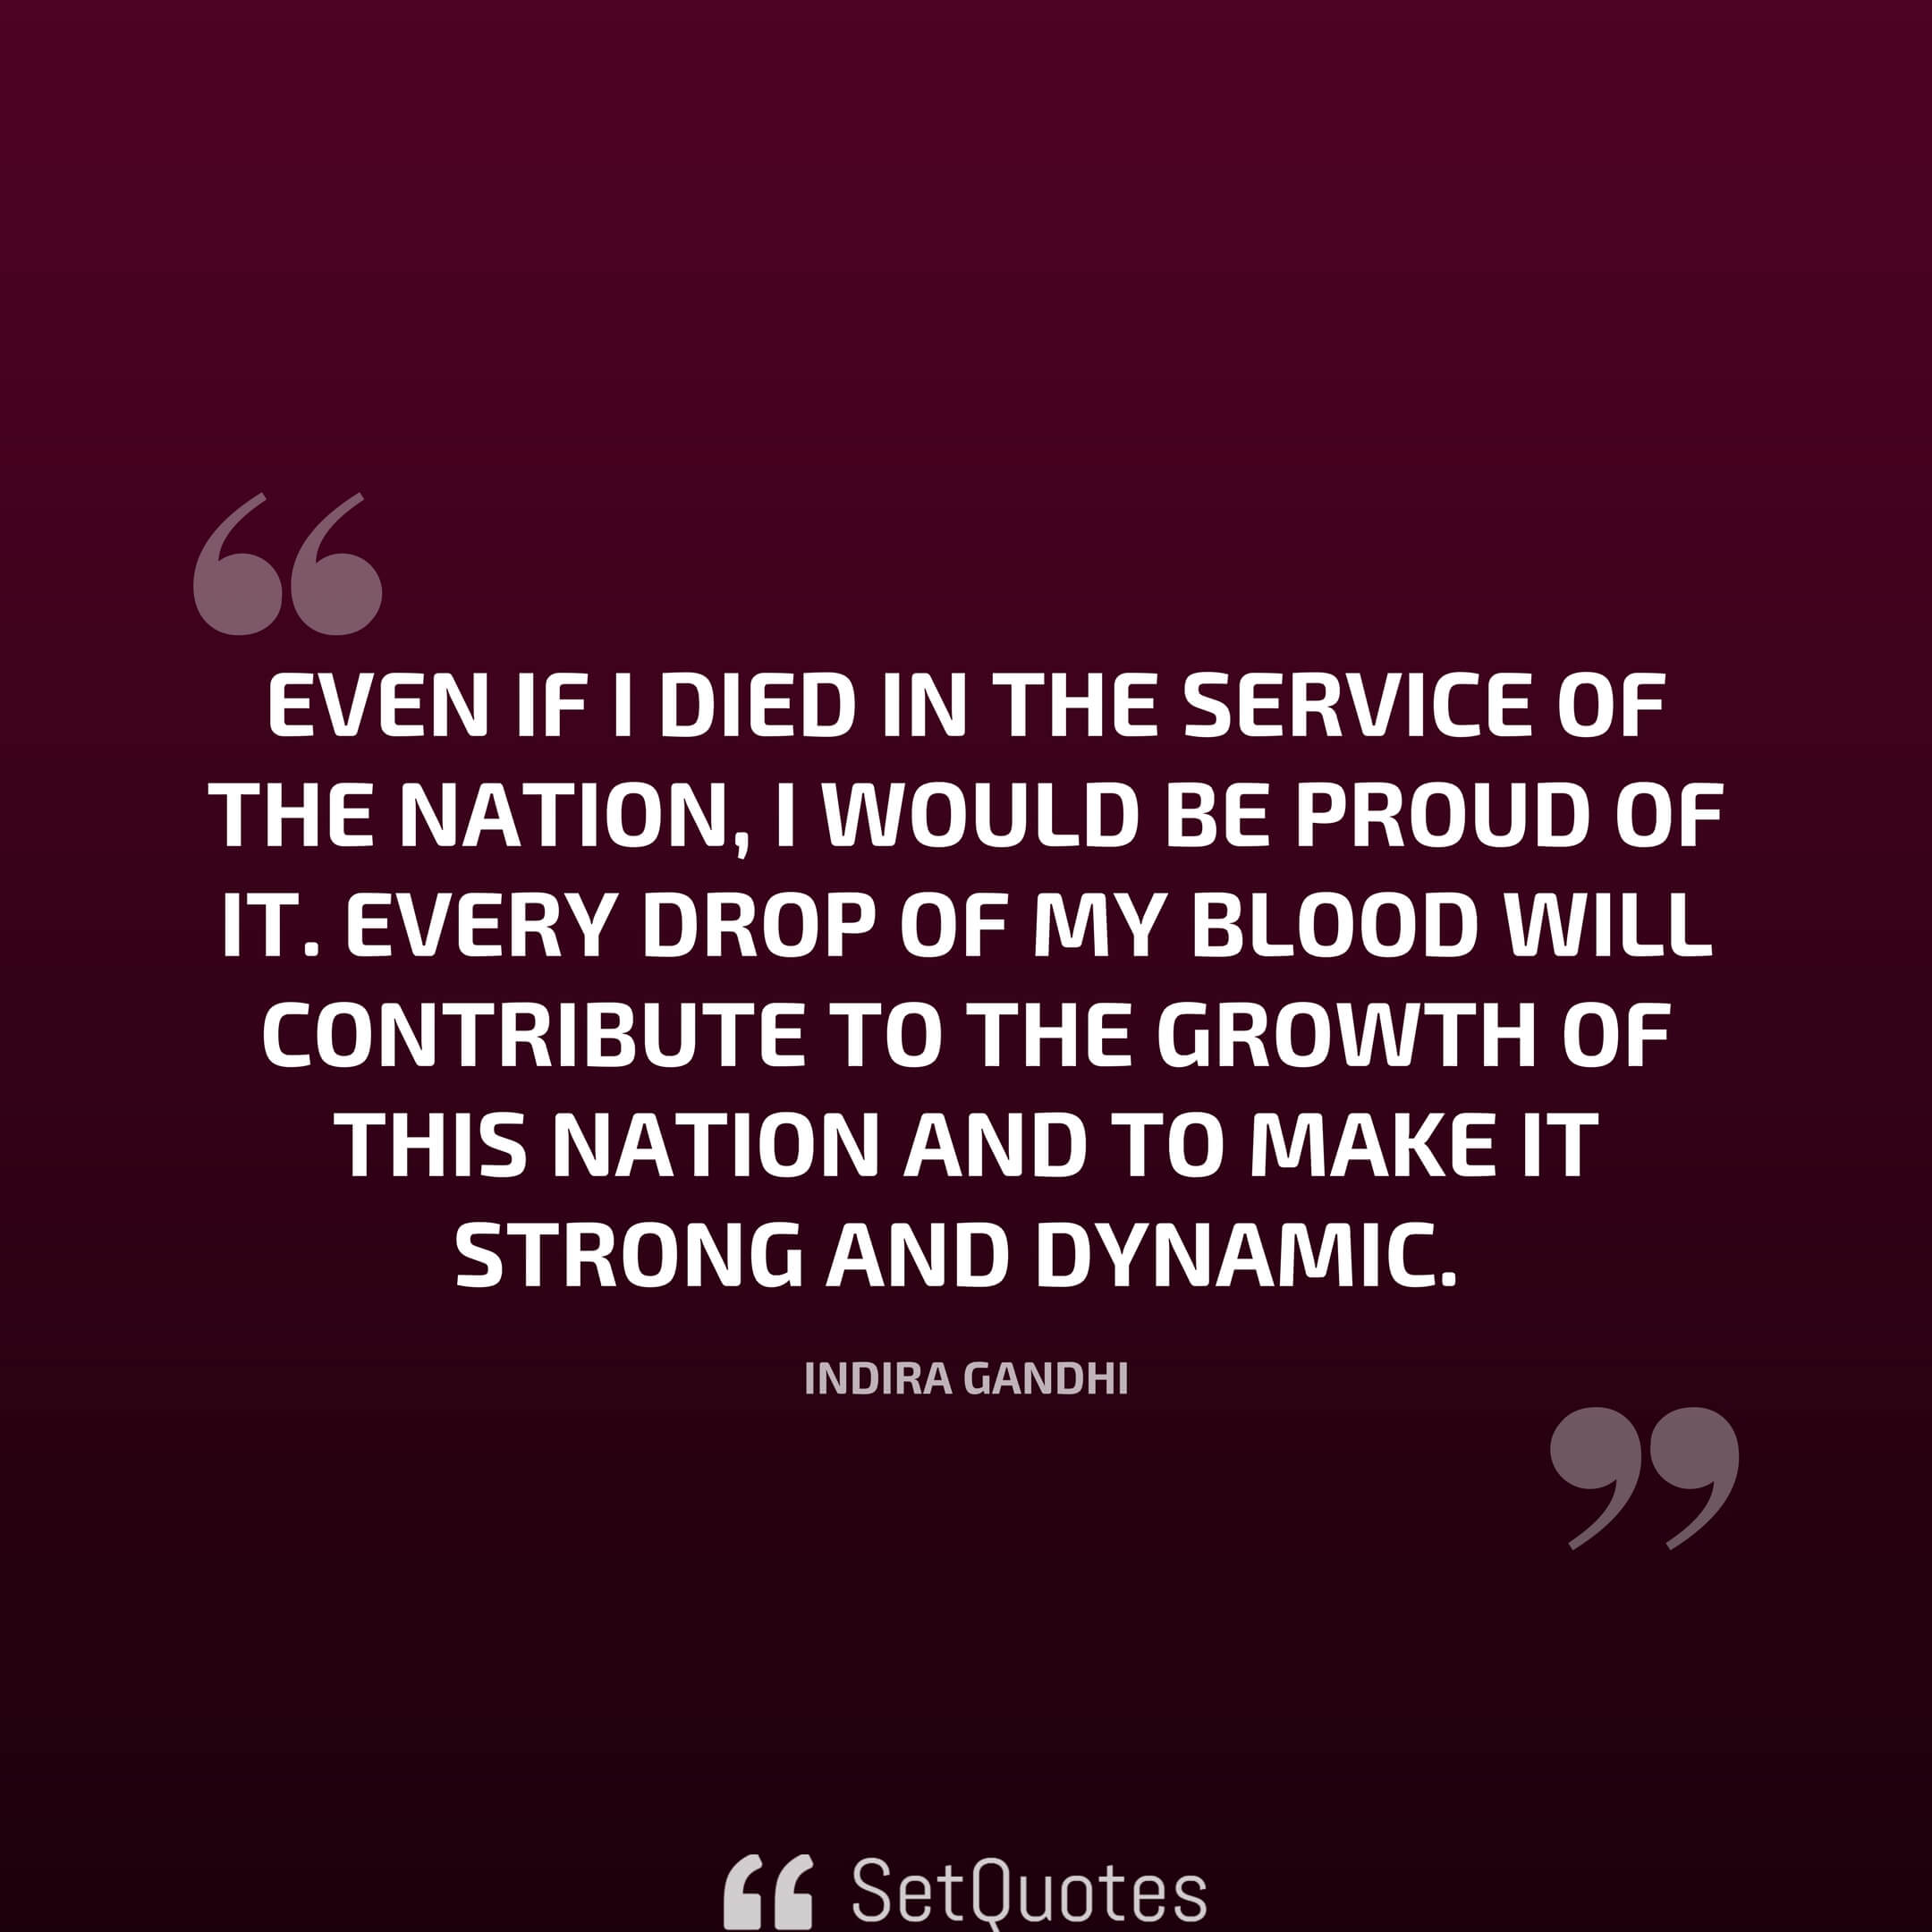 Even if I died in the service of the nation, I would be proud of it. Every drop of my blood will contribute to the growth of this nation And to make it strong and dynamic. – Indira Gandhi